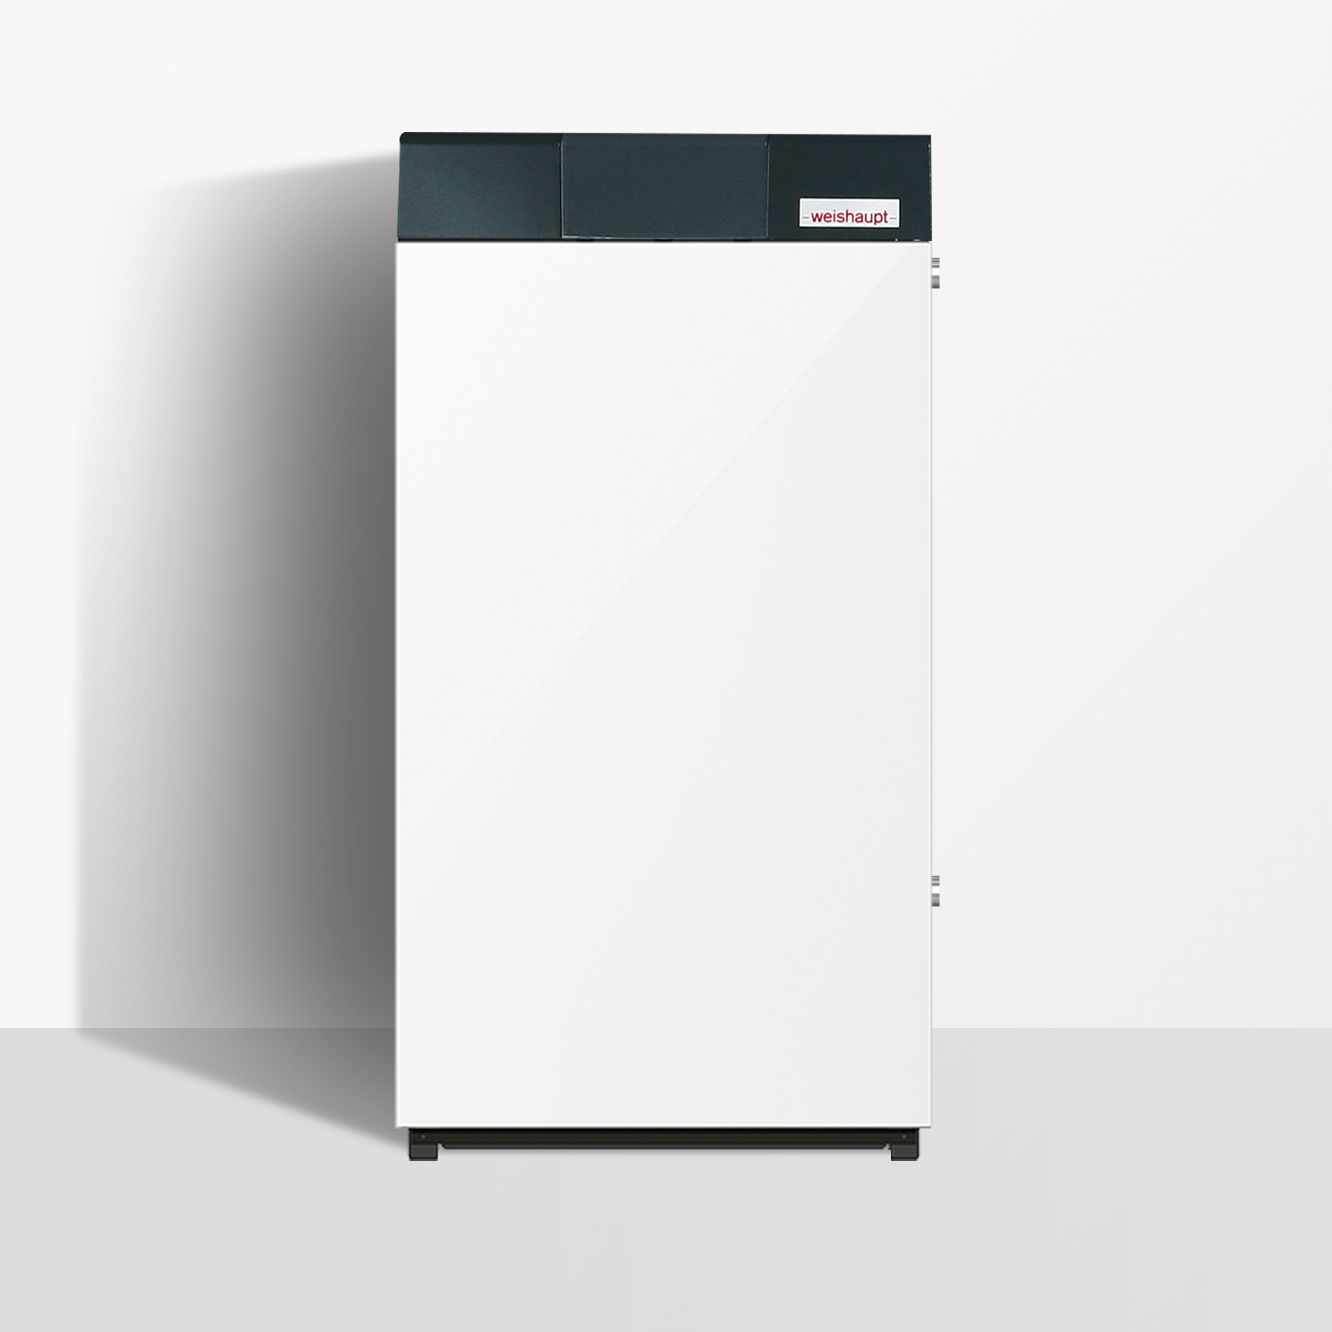 Weishaupt Thermo Condens WTC-OB (20, 25, 30, 35, 45 kW)